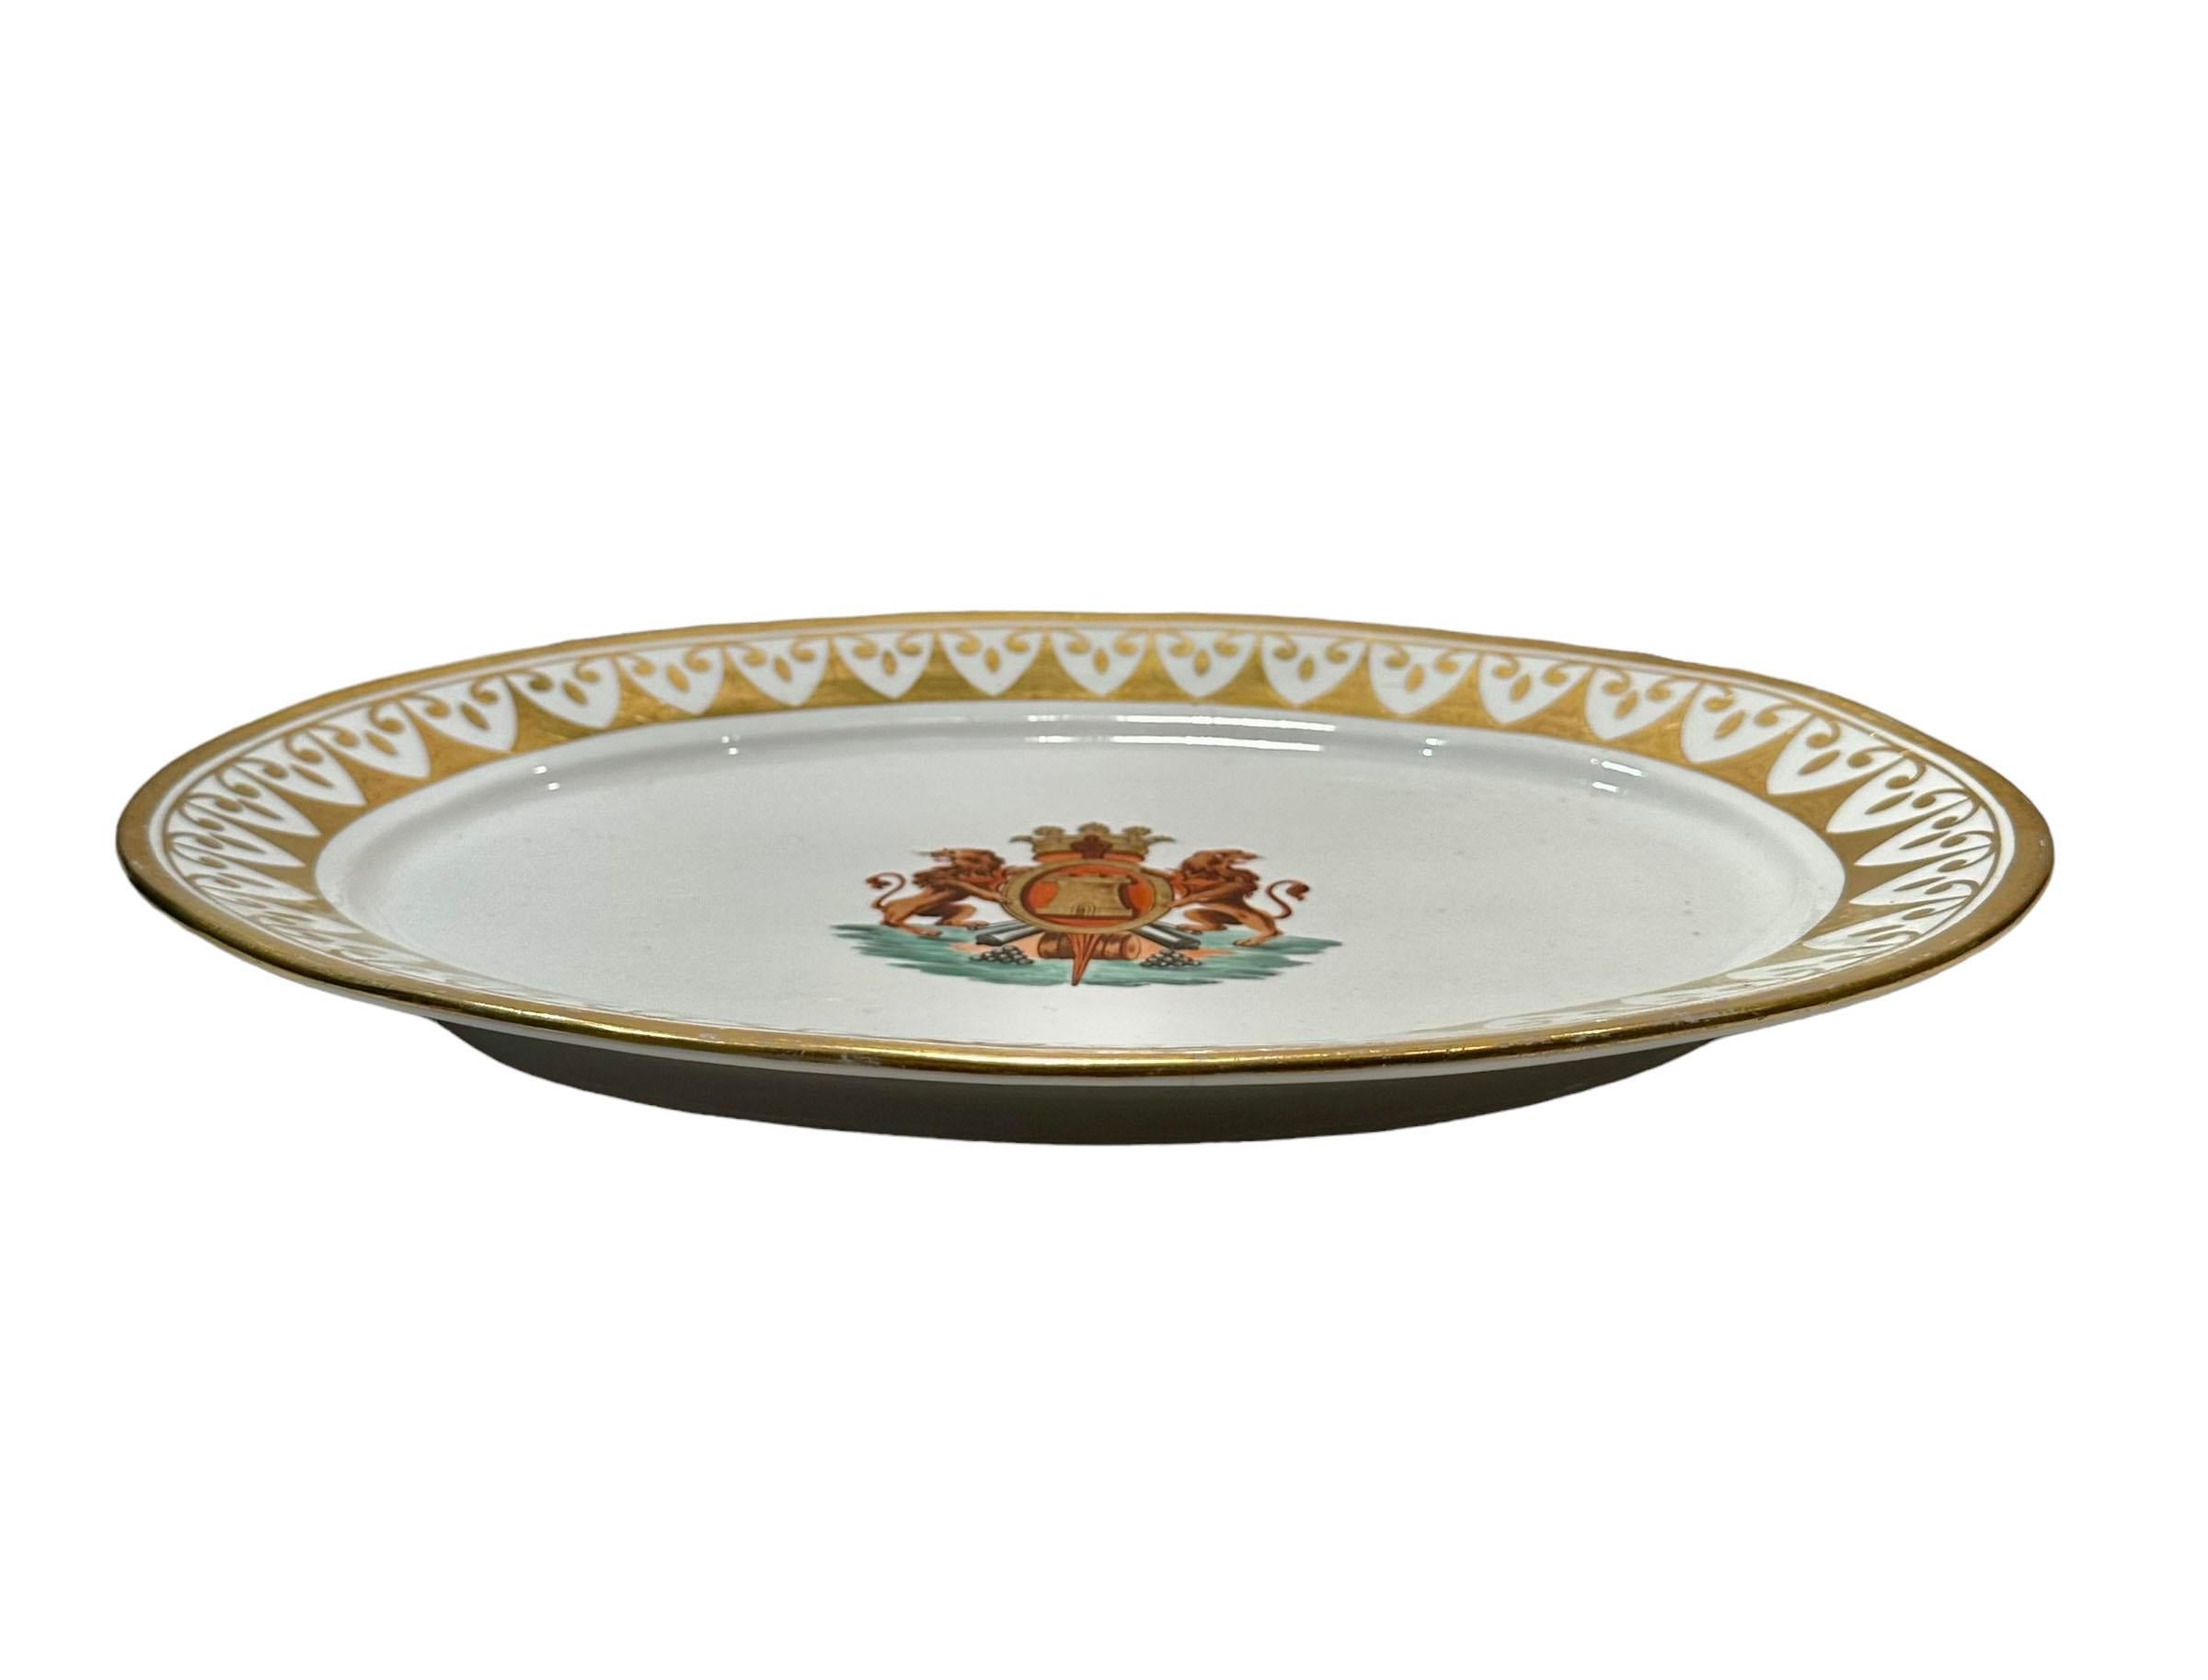 Coalport Coat Of Arms Platter   In Good Condition For Sale In Tampa, FL